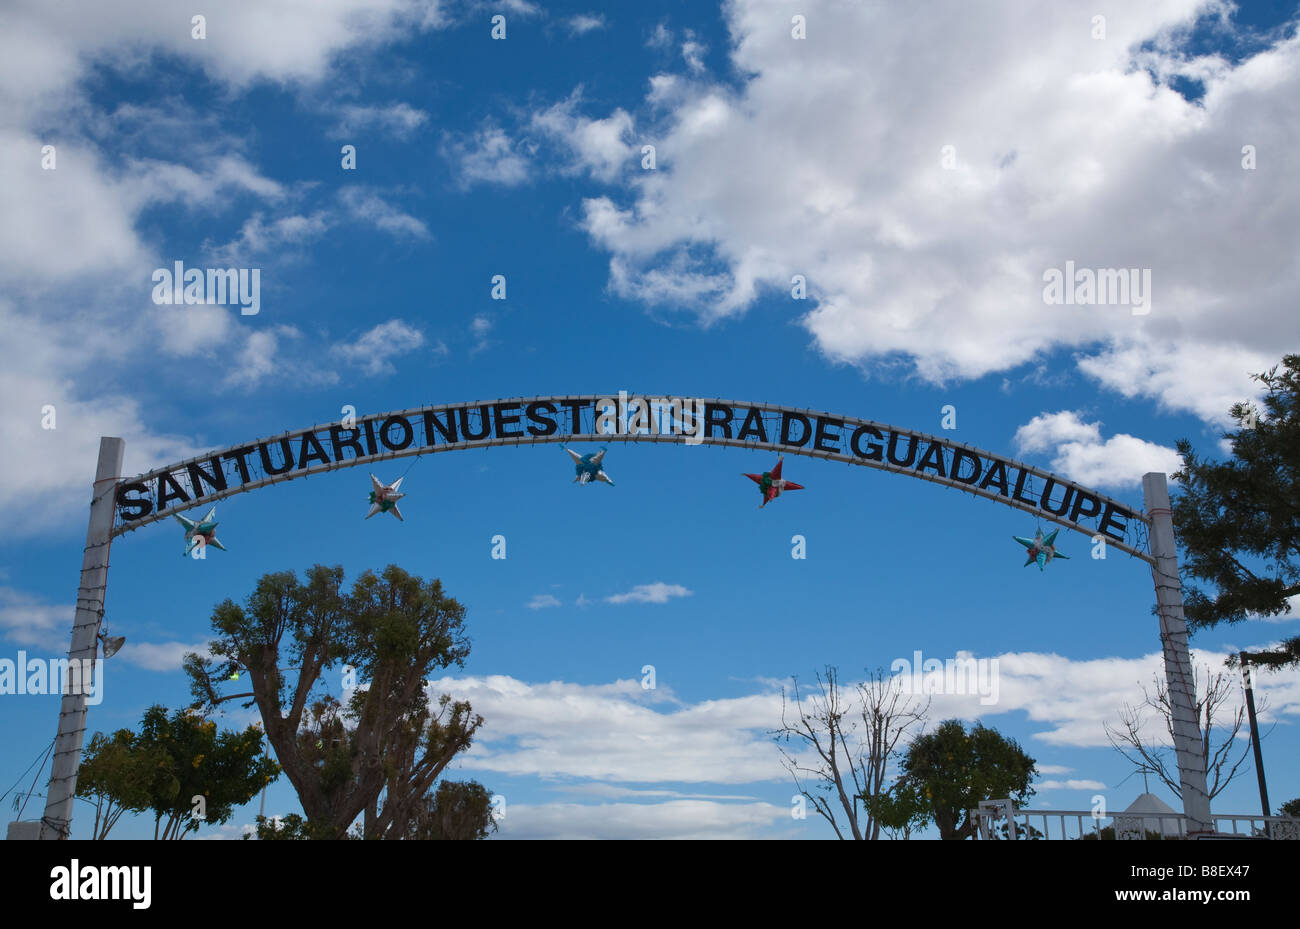 The entrance sign over the Santuario Nuestra Señora de Guadalupe Mecca CA against a deep blue sky with white clouds Stock Photo